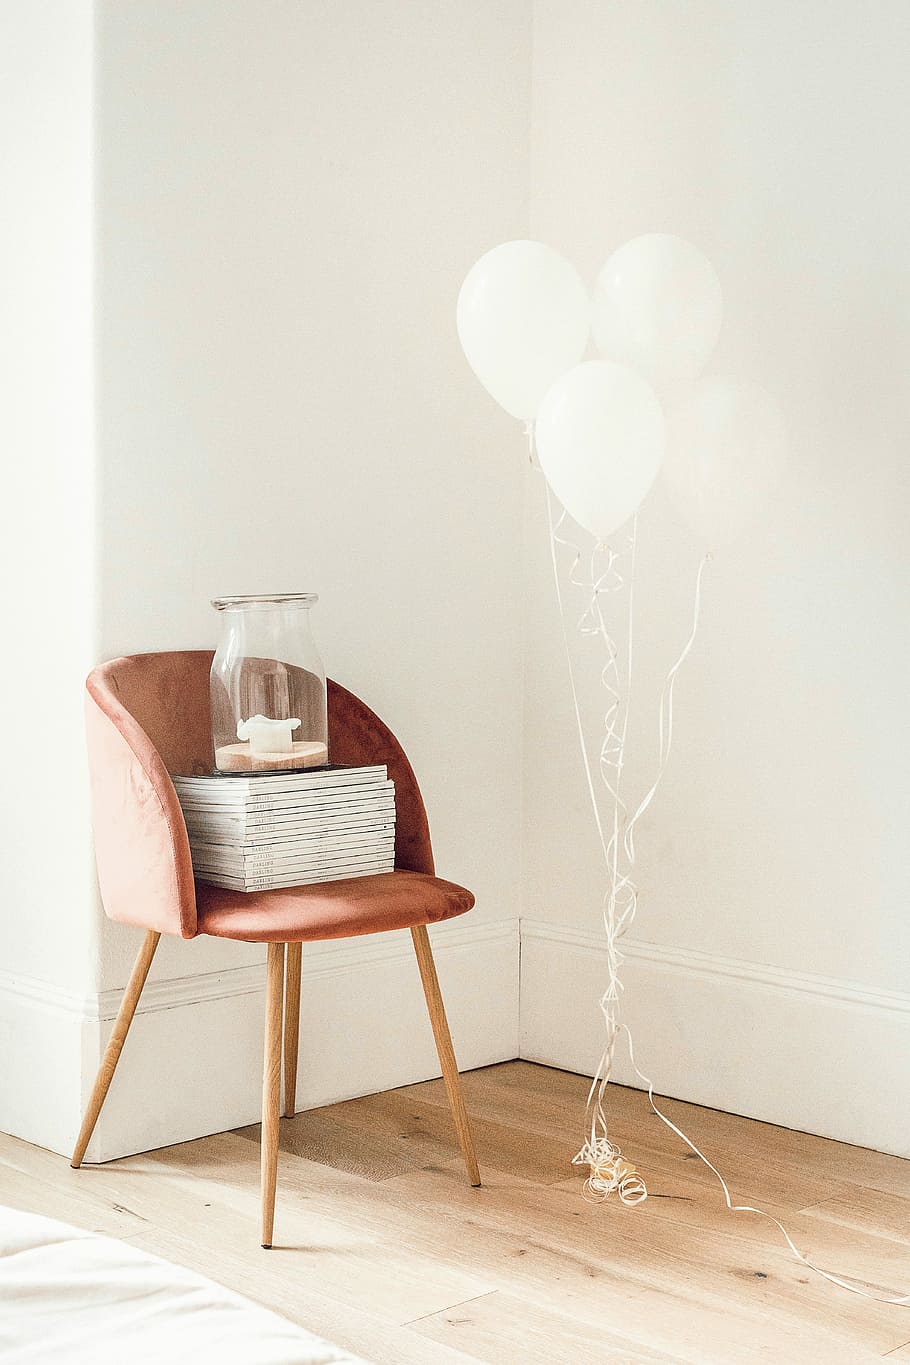 white balloons beside jar on book and chair, clear glass jar on top of chair beside balloons